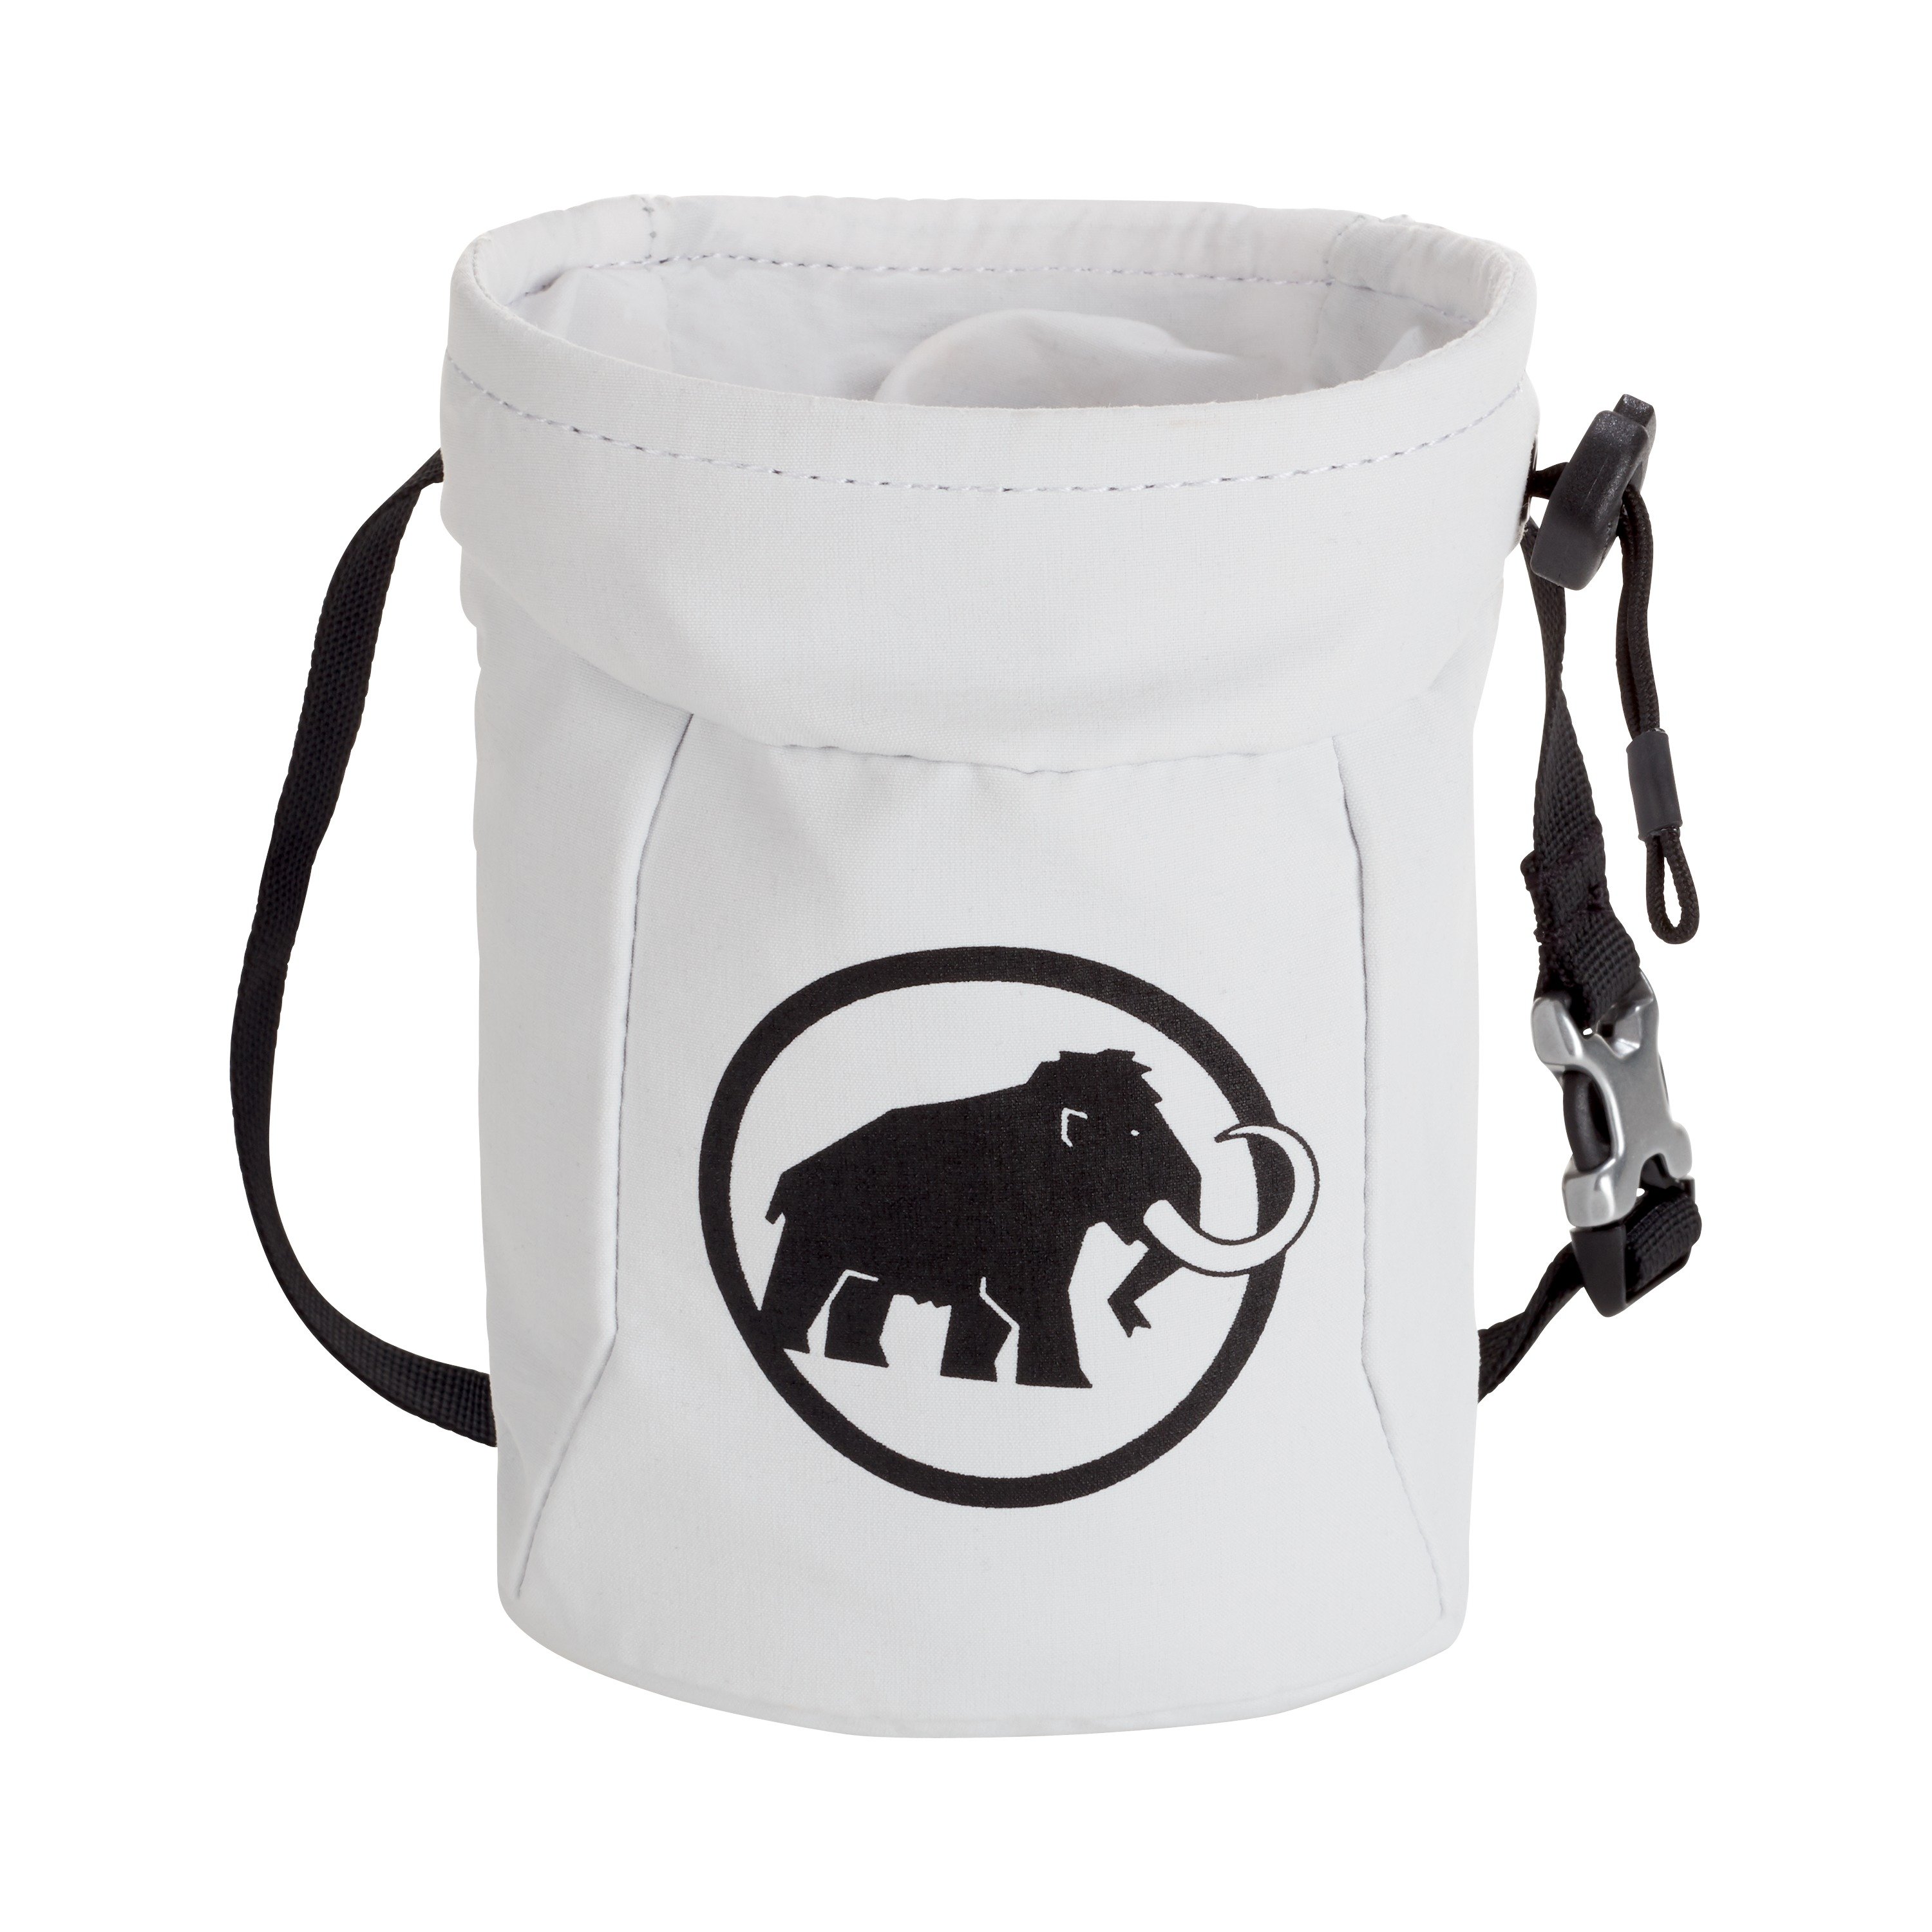 Realize Chalk Bag - bright white, one size product image